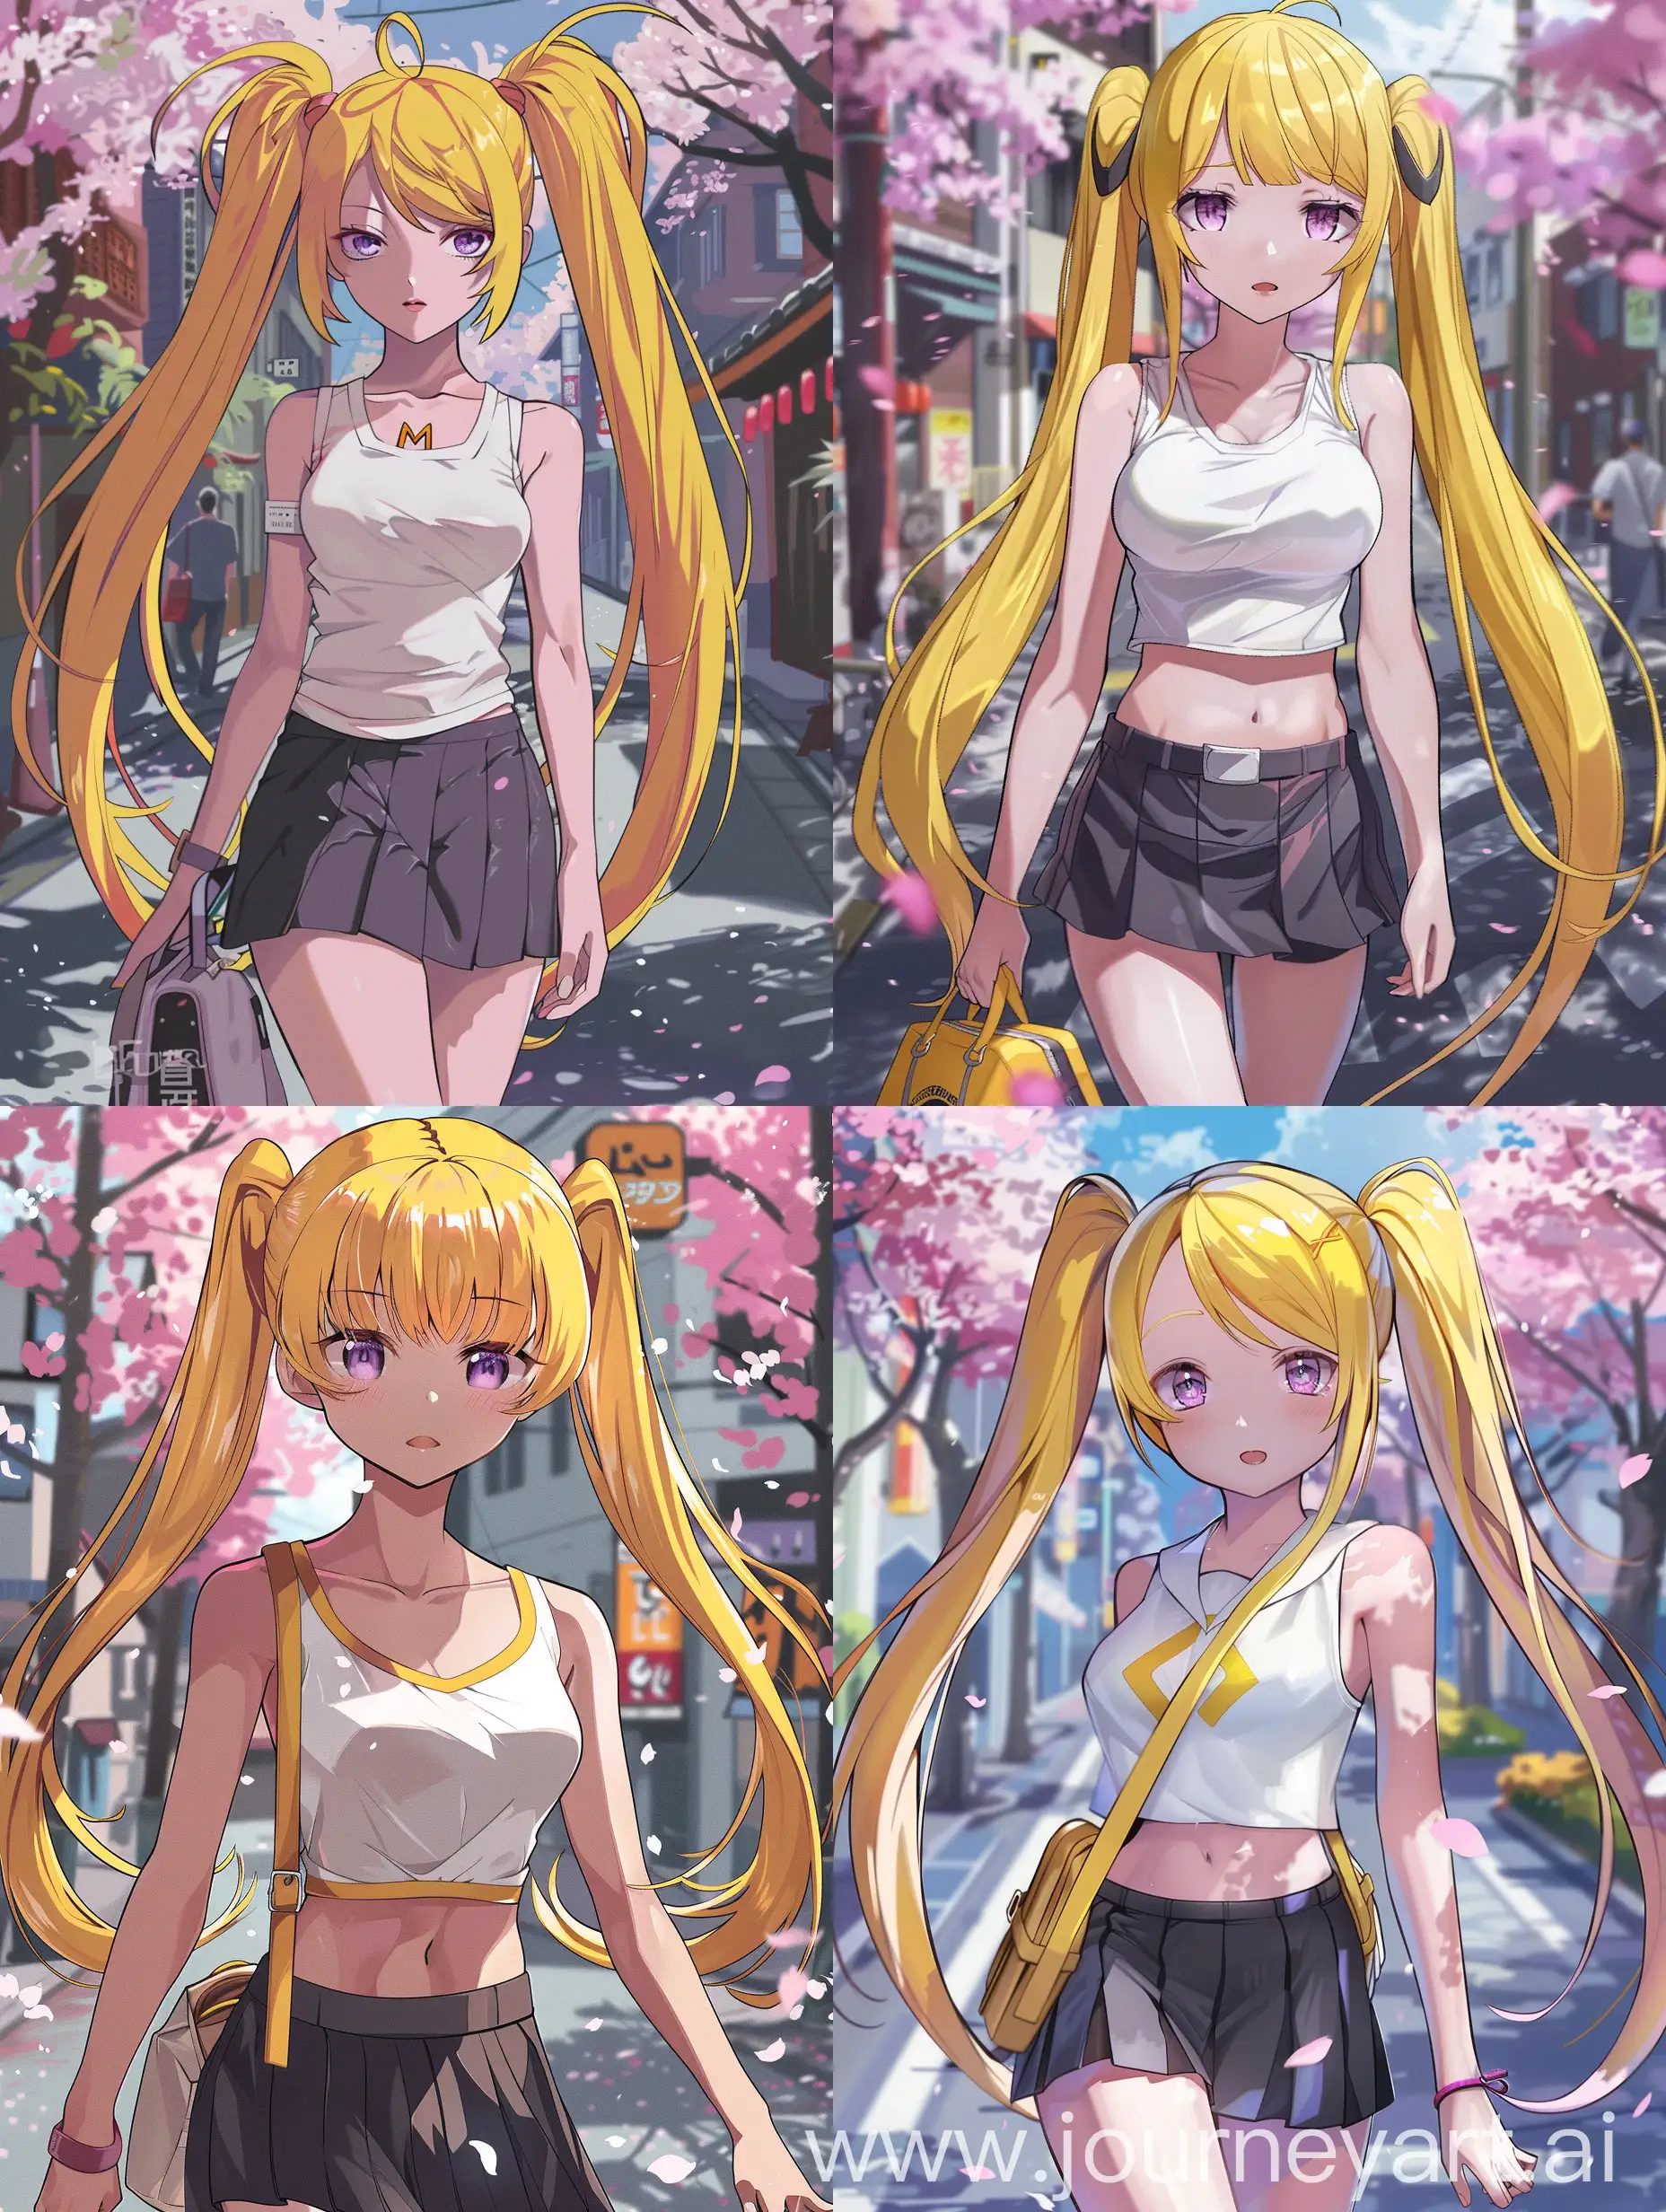 Anime-Girl-with-Yellow-Twin-Ponytails-Walking-Among-Cherry-Blossoms